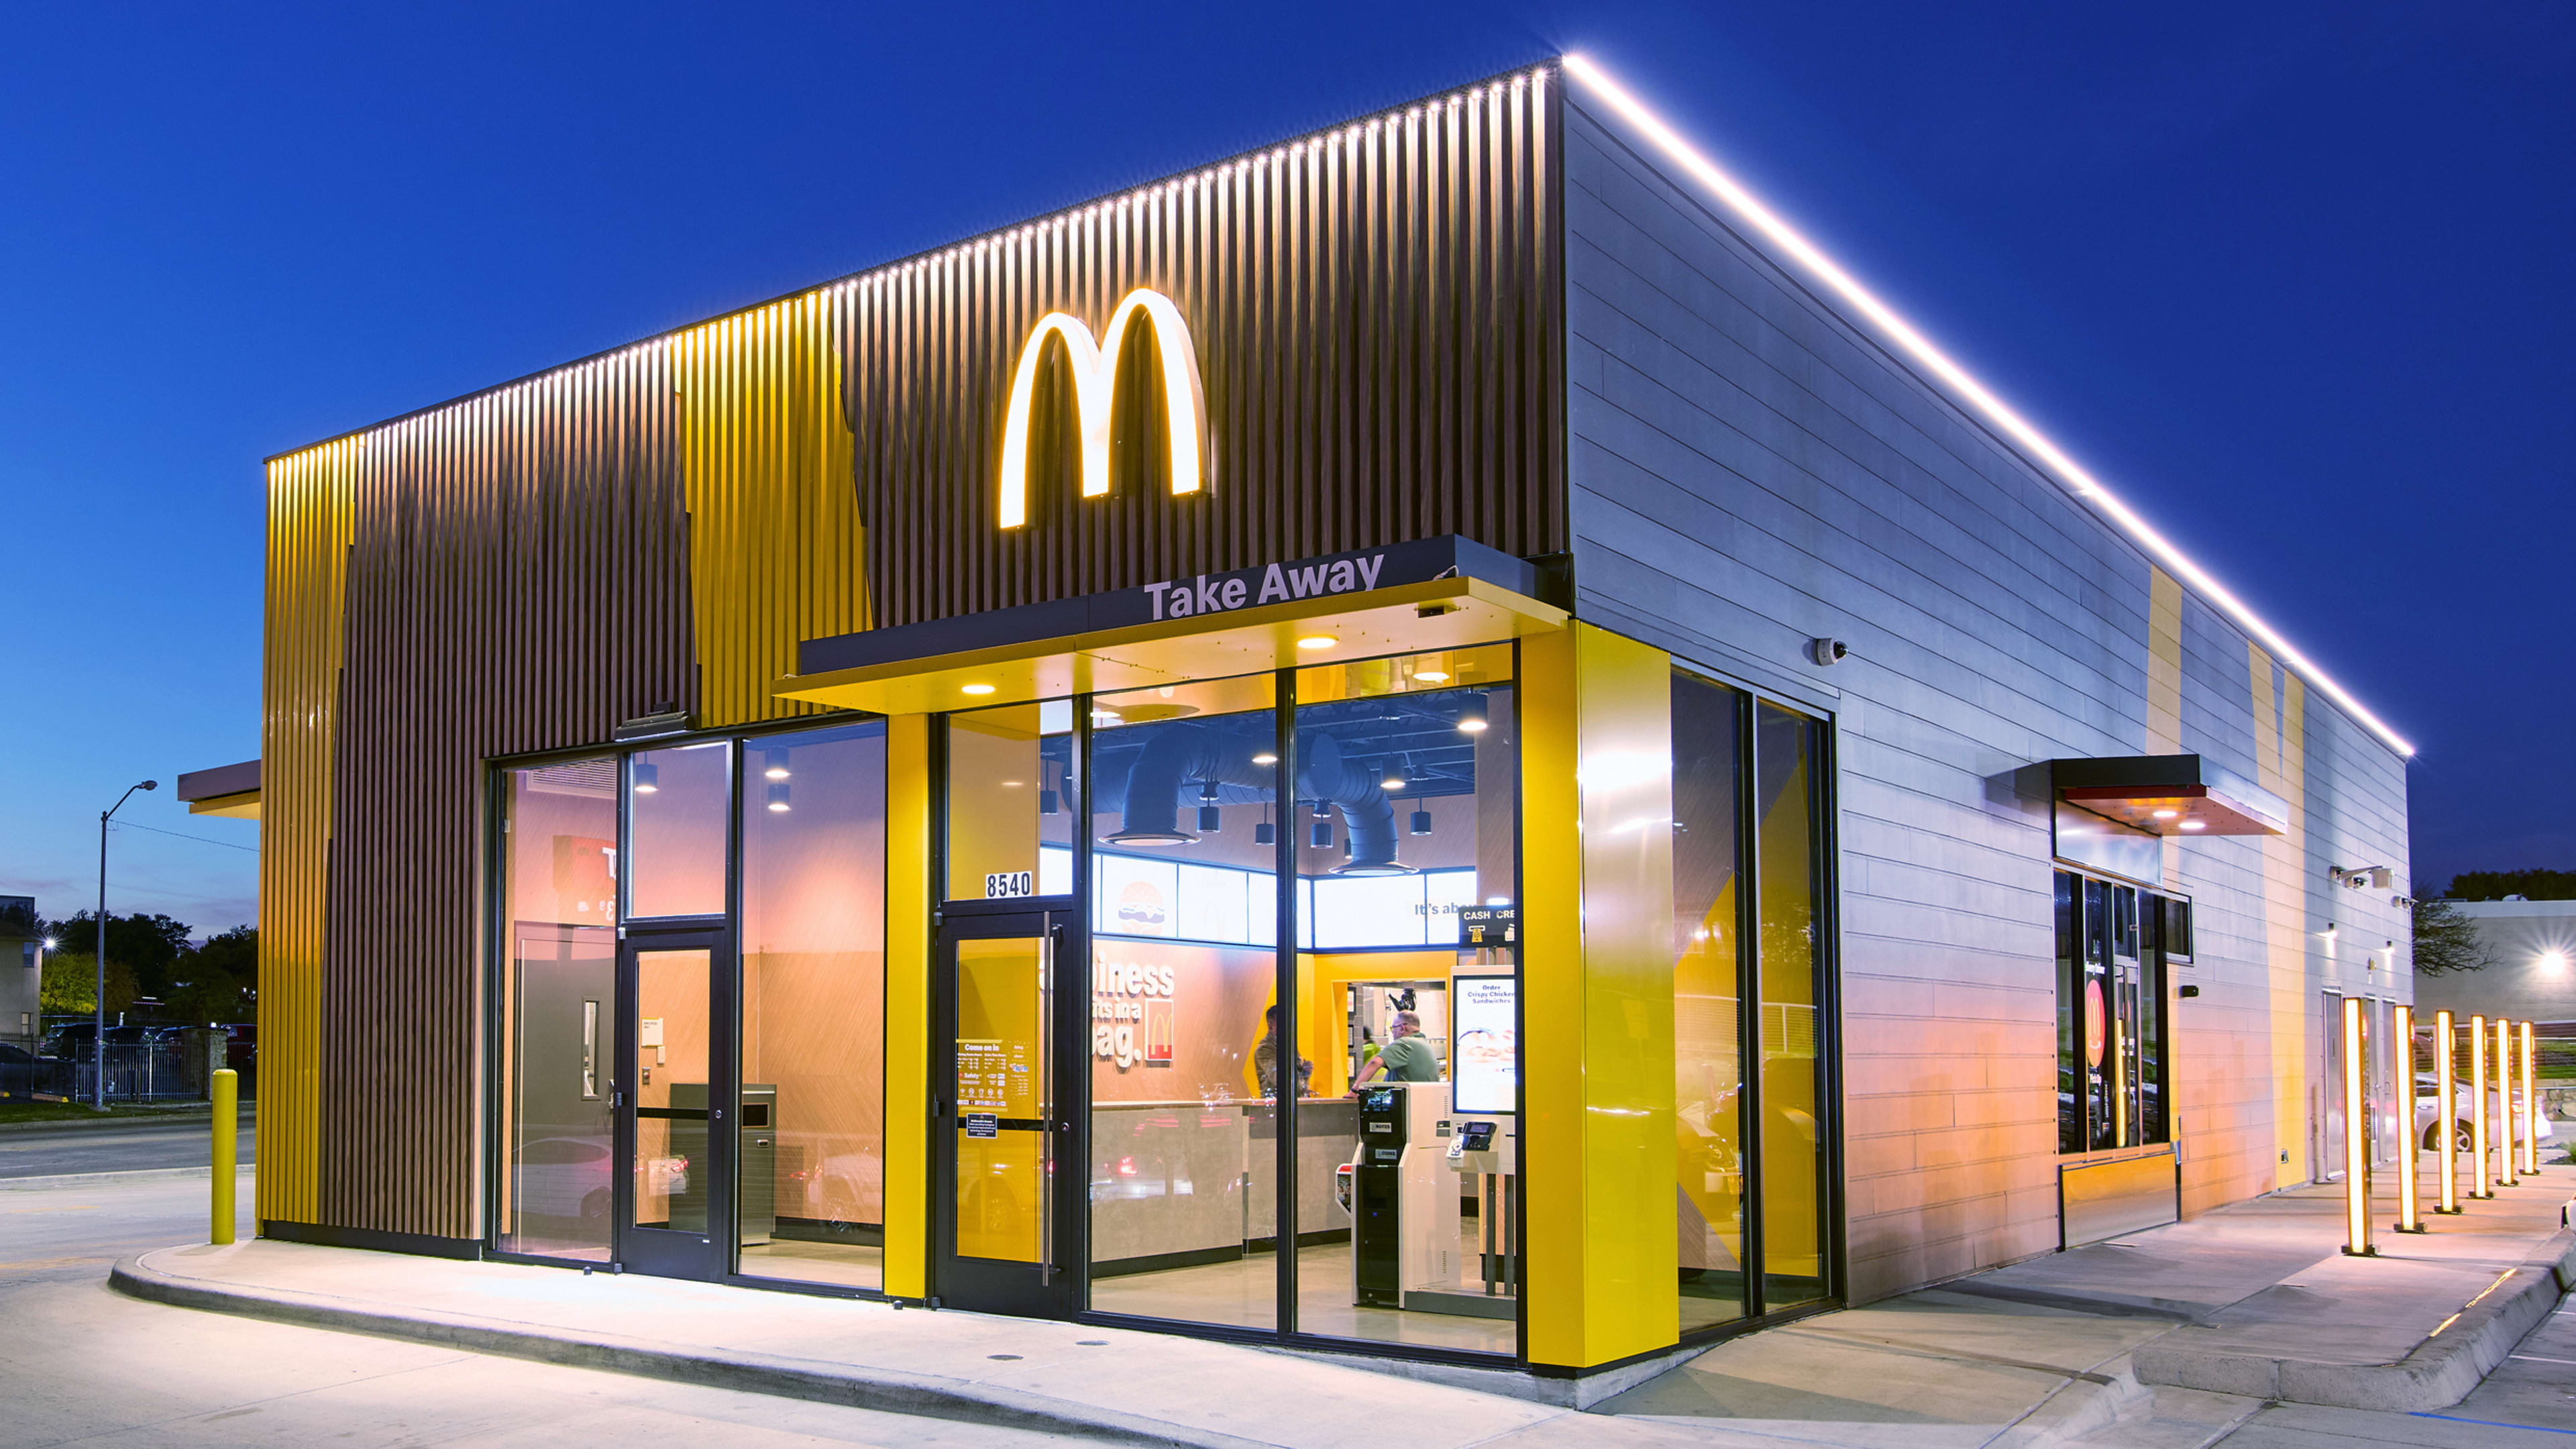 Why McDonald’s just opened a digital drive-through in Texas